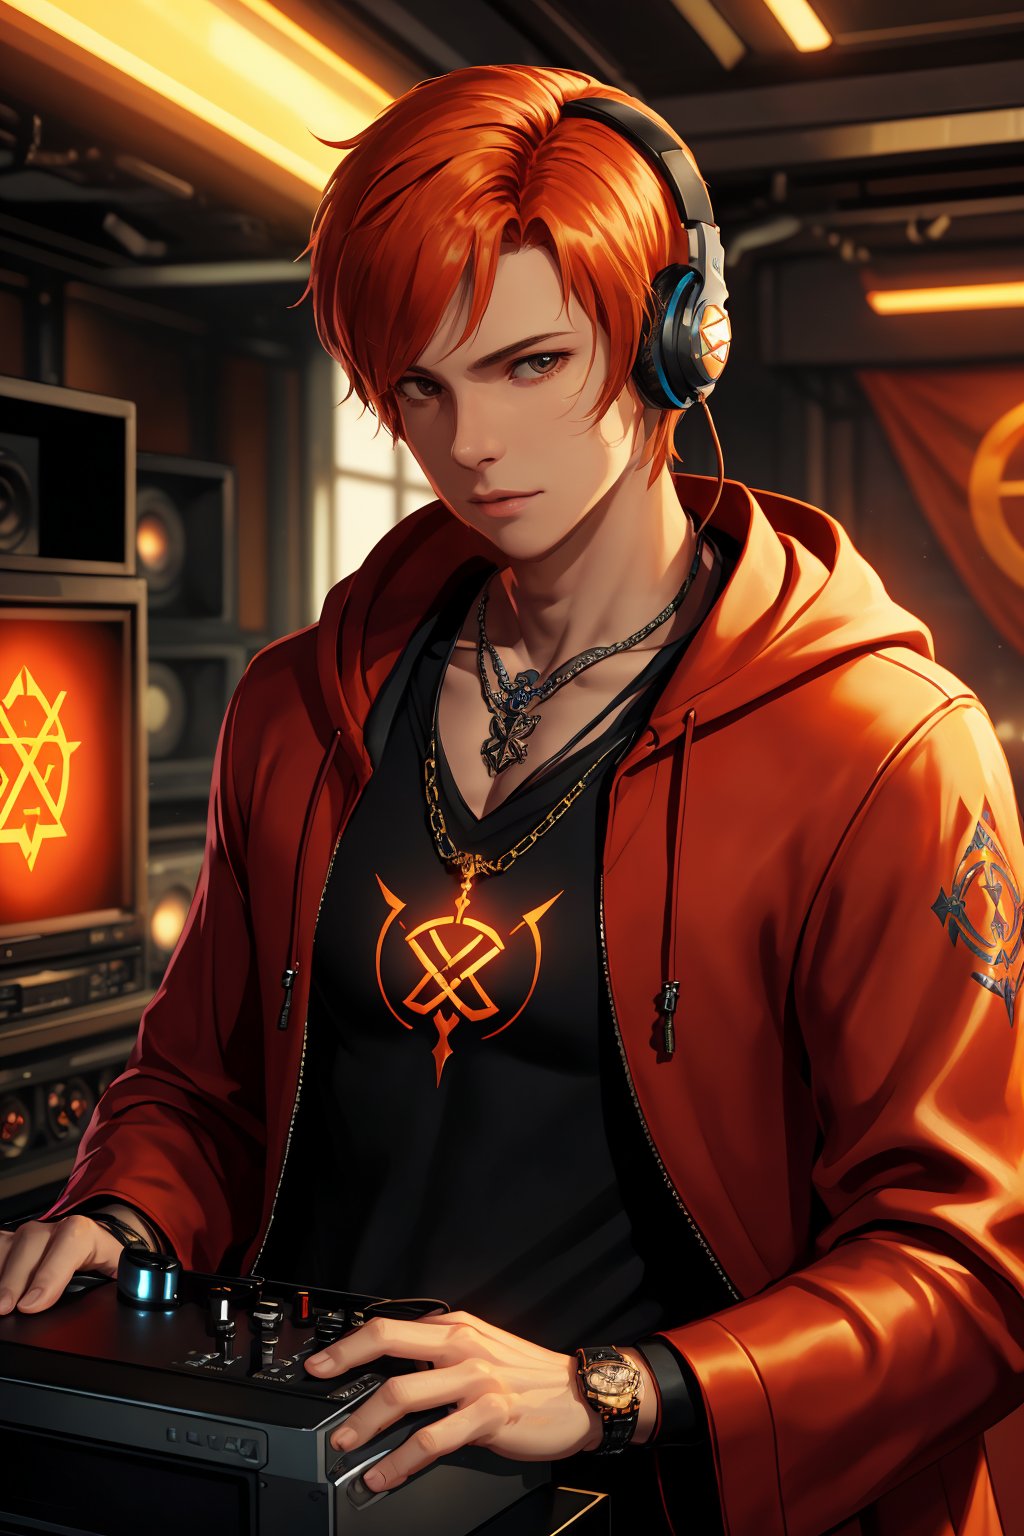 exquisite details and texture, detailed face, anatomy correct, best quality, ultra detailed, photorealistic, ((cinematic scenic view of 1 male, sunglasses)), short hair, orange hair, wore a pair of headphones, red colored robe, cool, flame tattoos, flame pentagram necklace. He was a radio DJ, playing music in a tiny radio studio, front view, upper body, Cyberpunk style